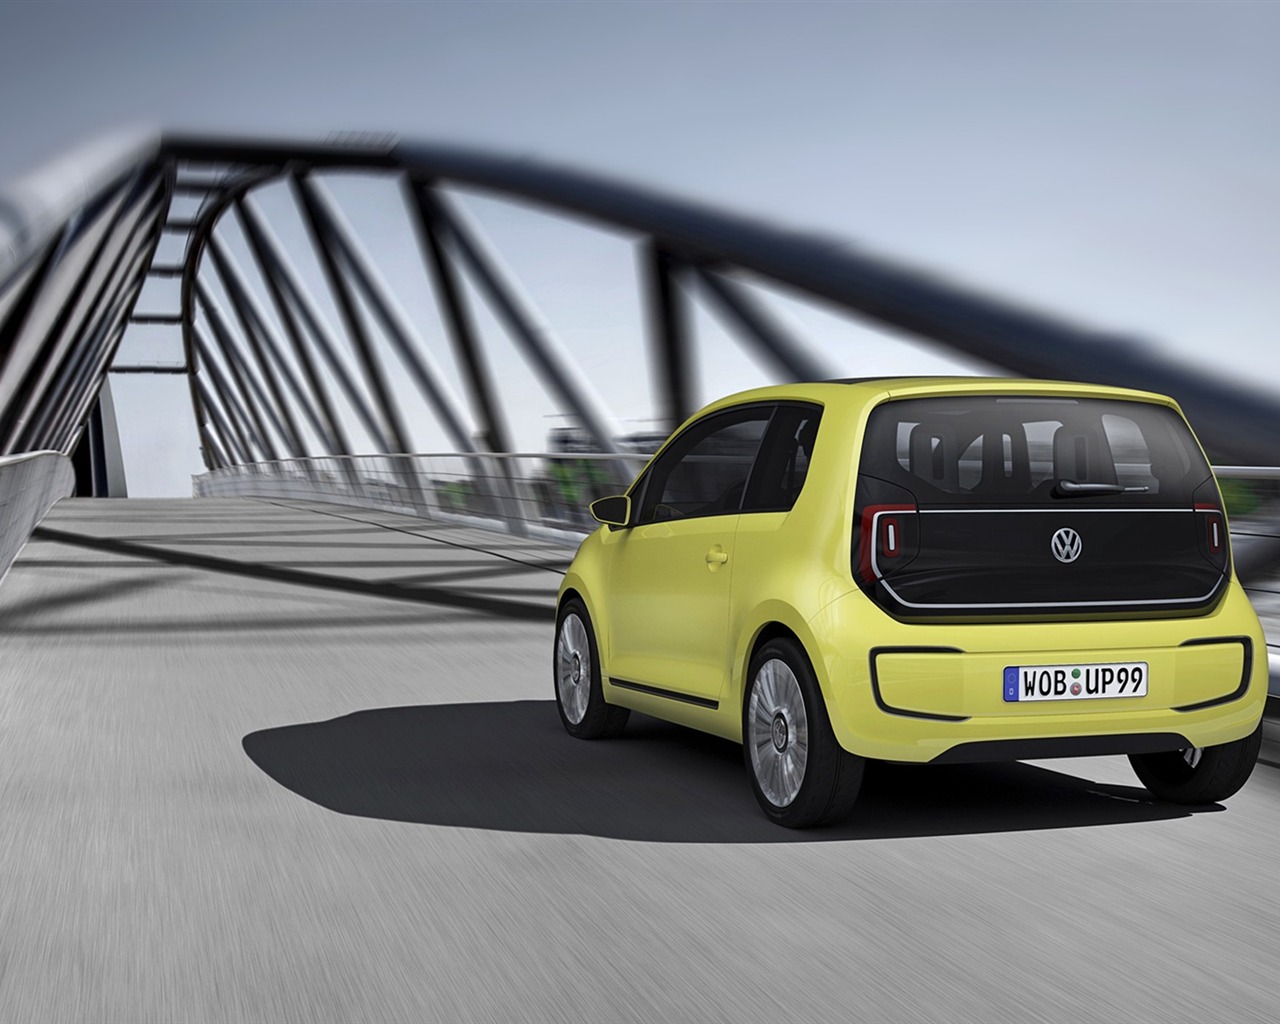 Volkswagen Concept Car tapety (2) #16 - 1280x1024